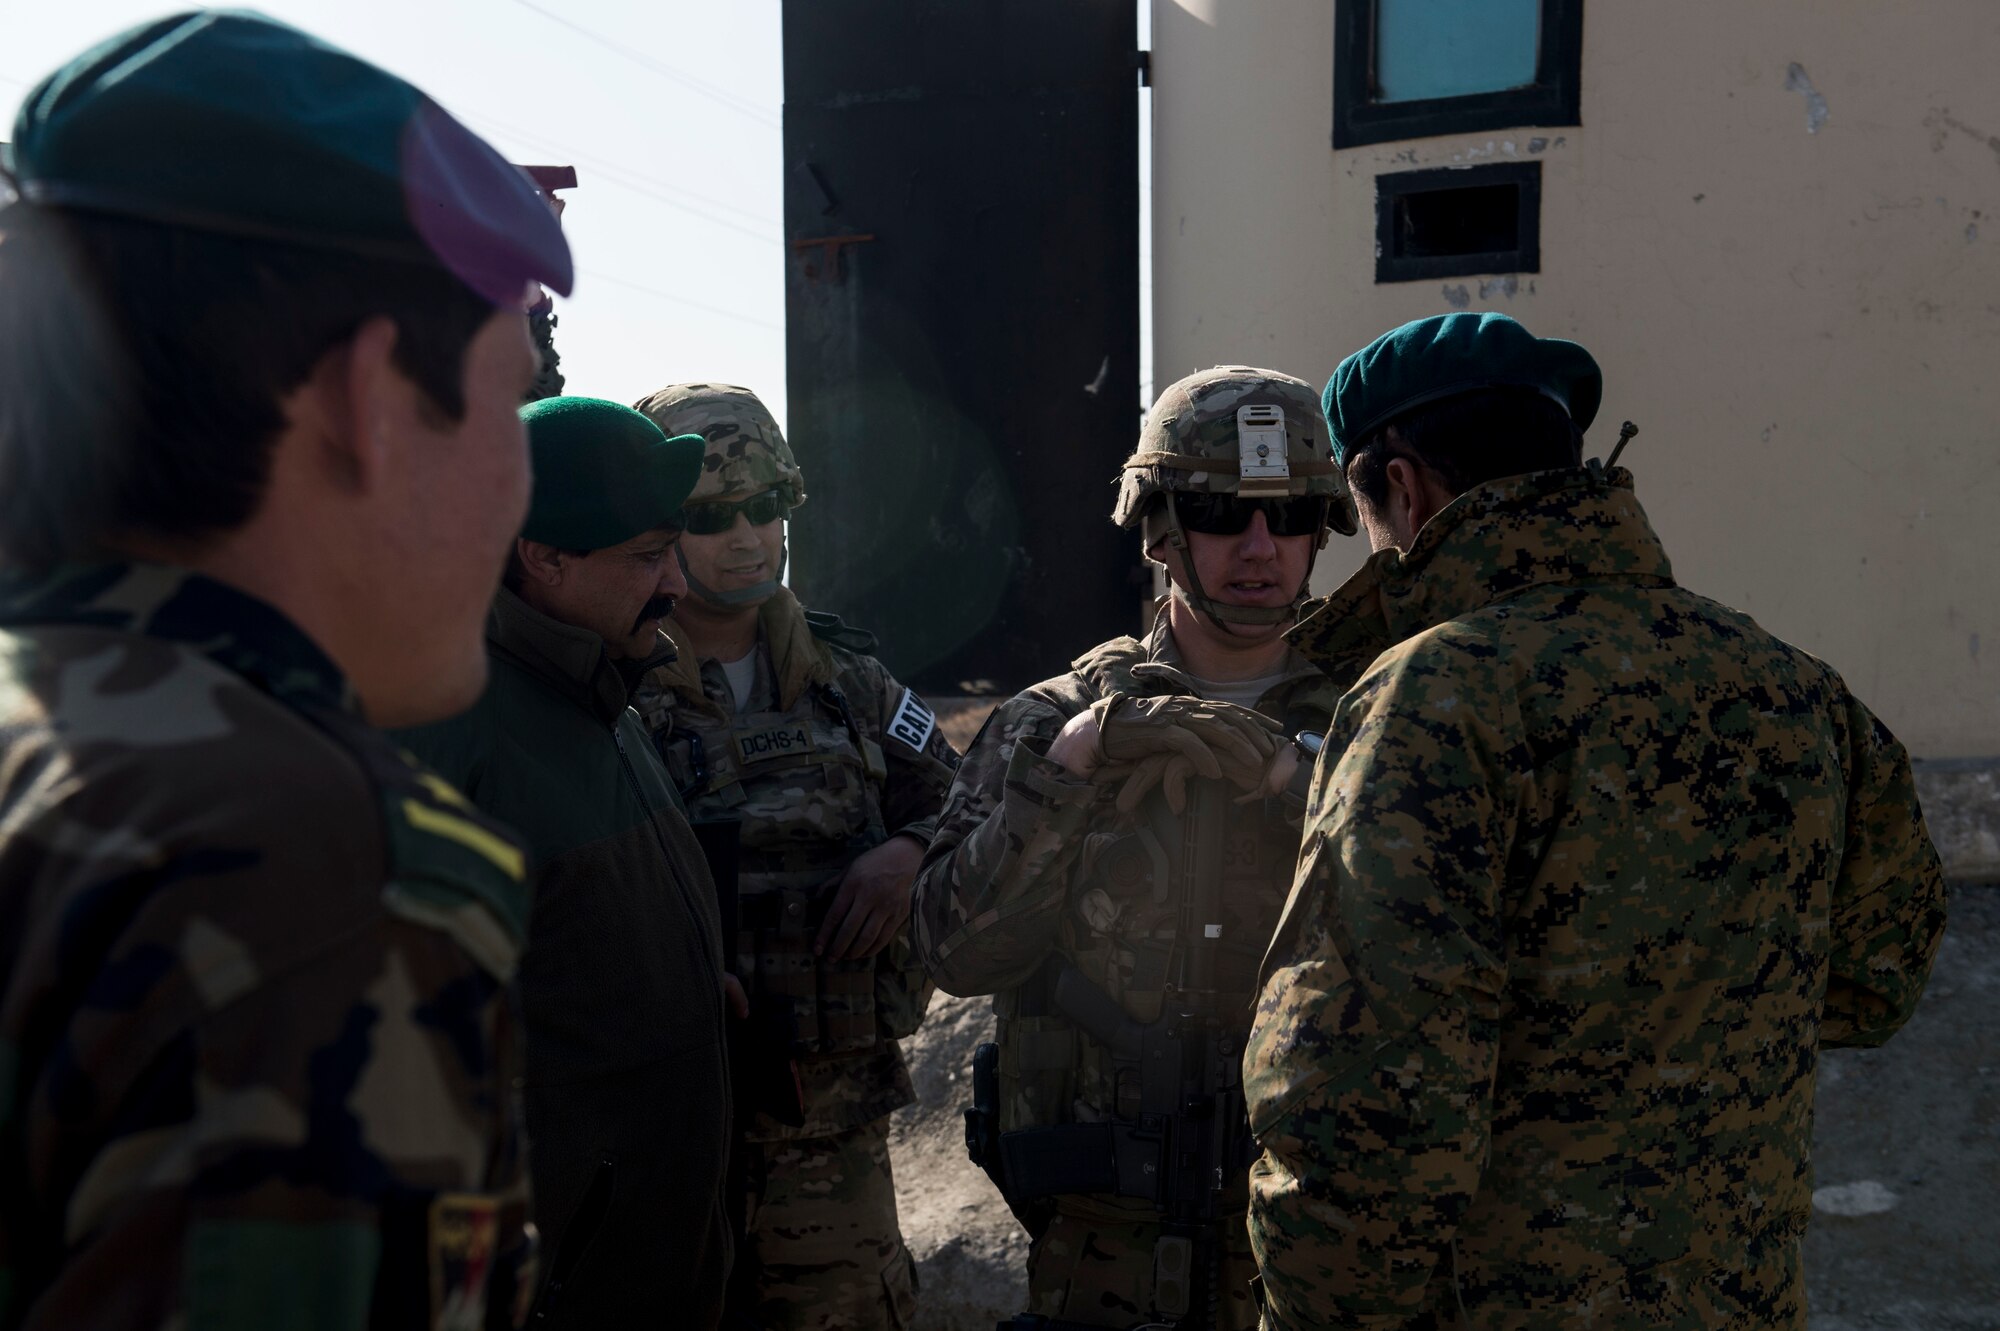 (Left) U.S Air Force Staff Sgt. Mark Saldana and Tech. Sgt. Beau Hanson visit with Afghan Air Force soldiers near Forward Operating Base Oqab, Kabul, Afghanistan, Dec. 13, 2015. Saldana and Hanson are assigned to Train, Advise, Assist Command-Air (TAAC-Air) security forces as advisors.  (U.S. Air Force photo by Staff Sgt. Corey Hook/Released)